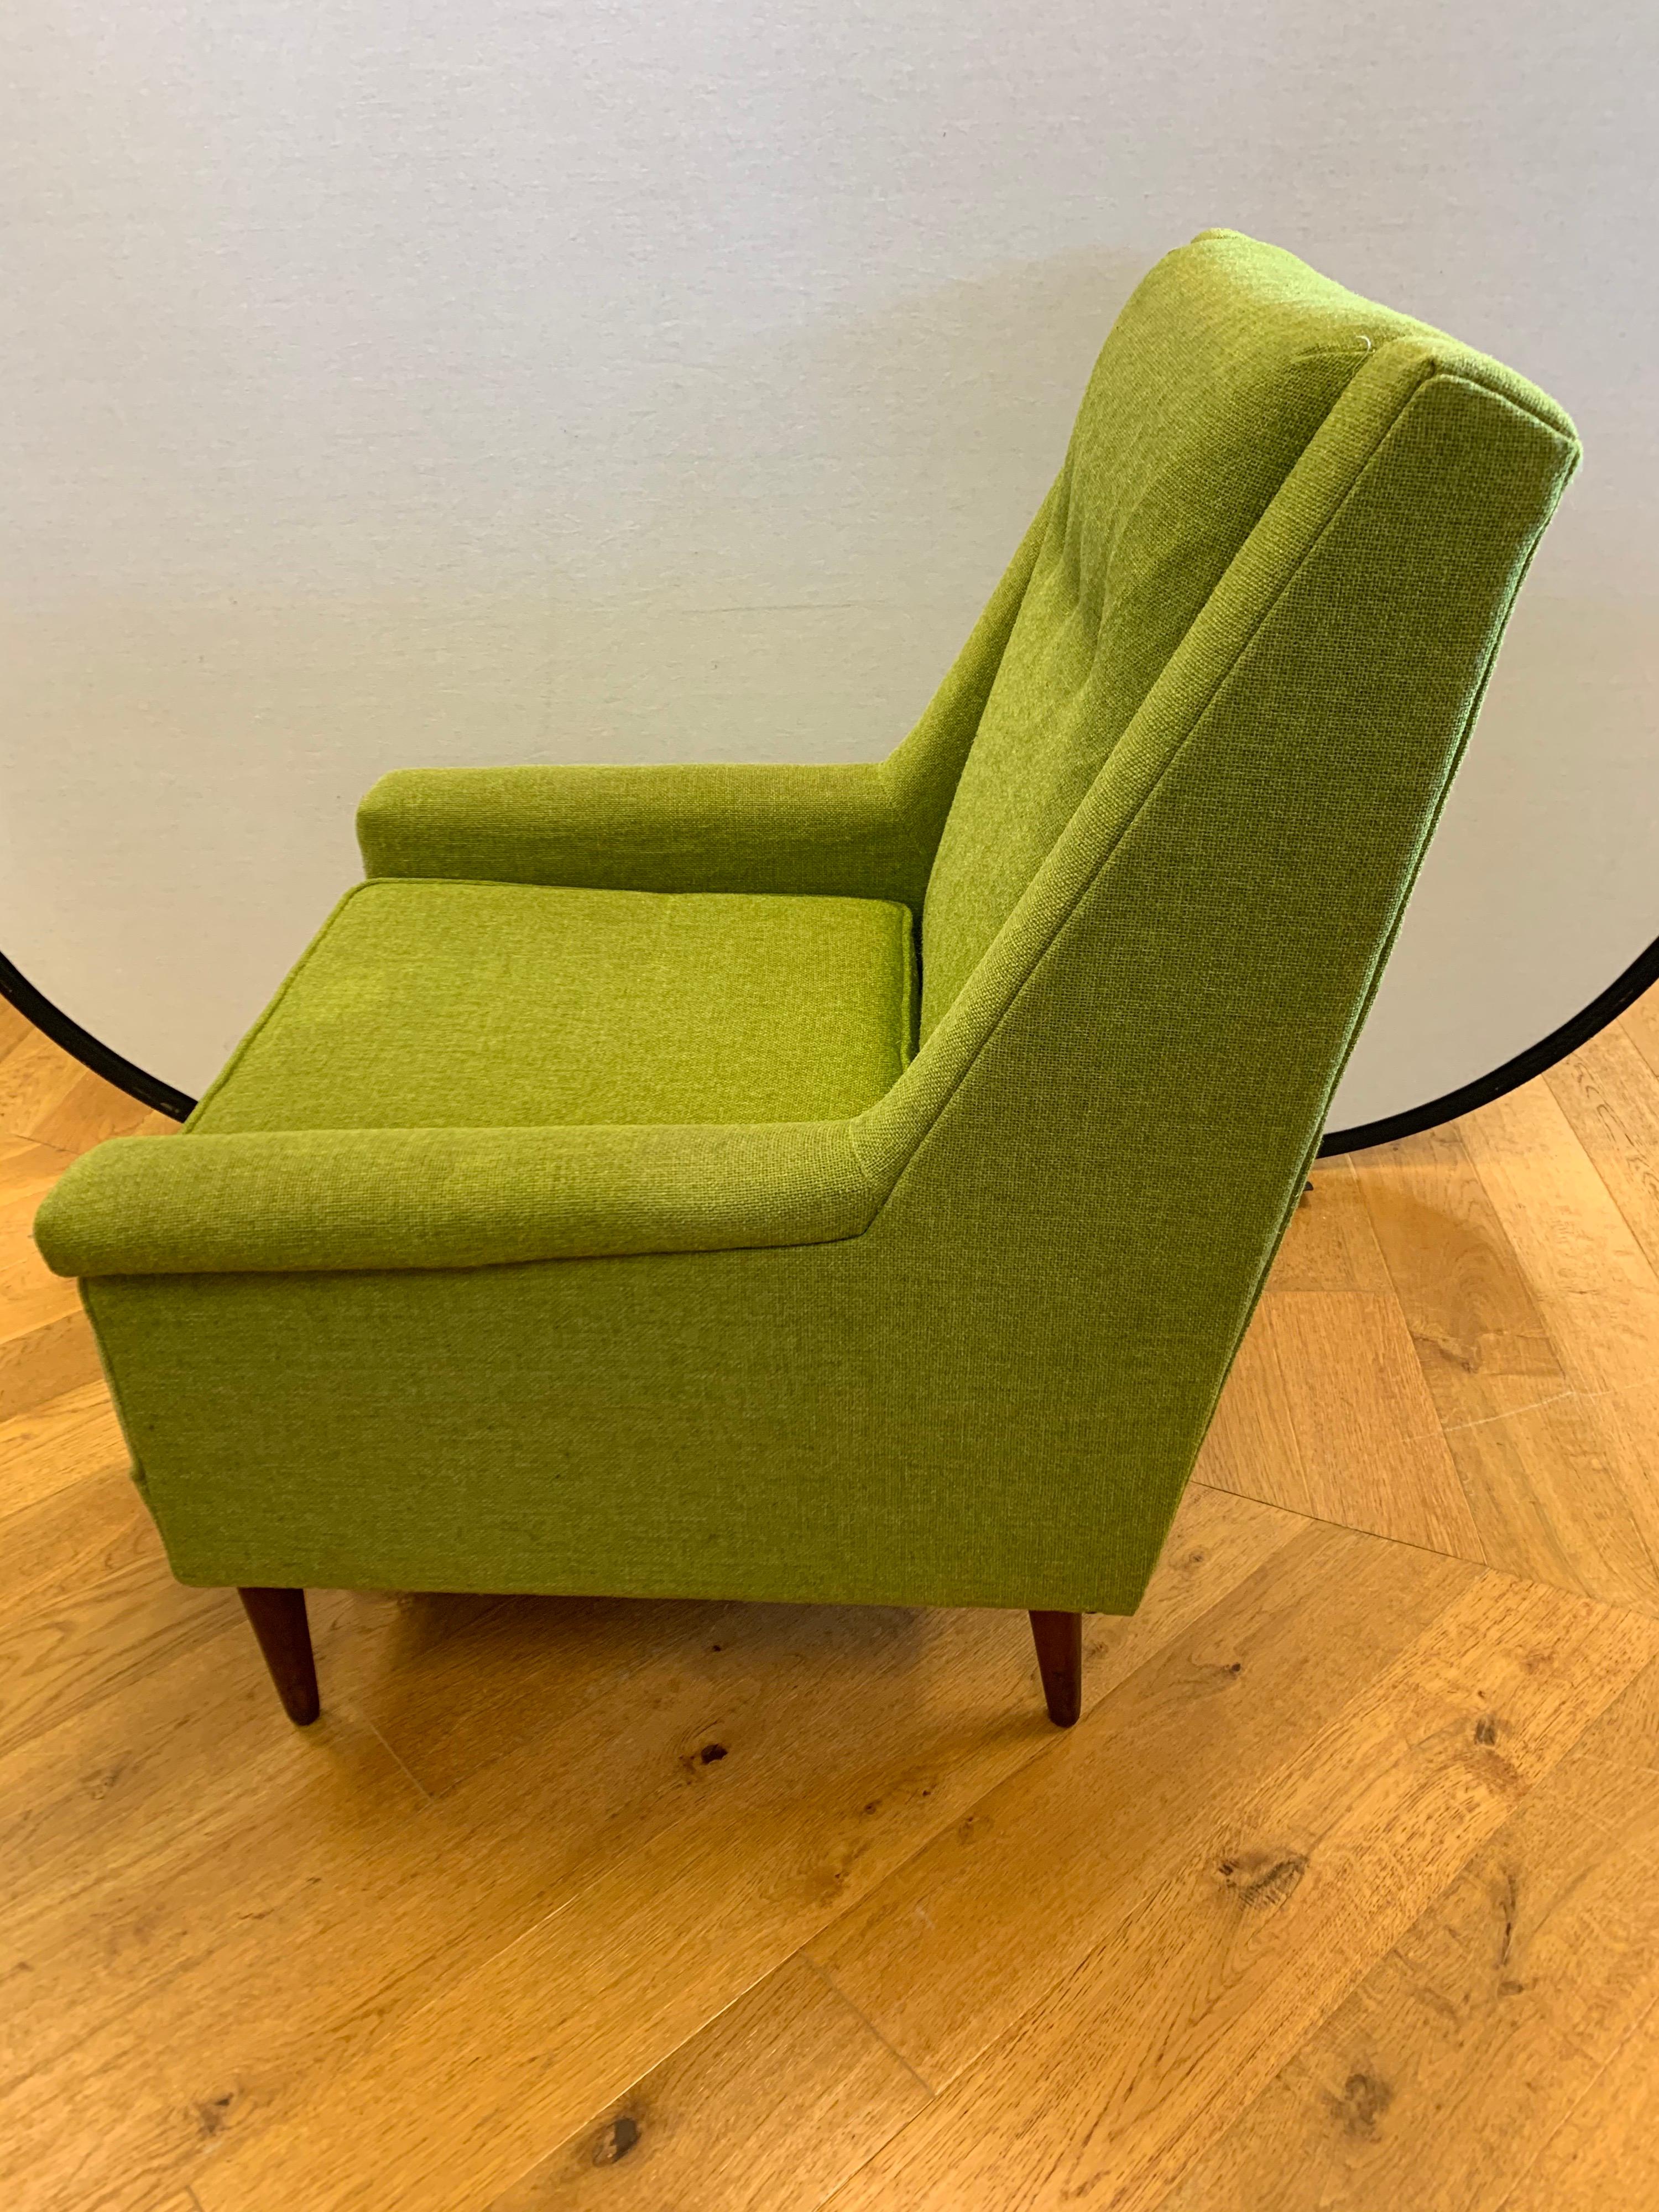 Late 20th Century Flexsteel Midcentury Green Upholstered Modern Lounge Chair